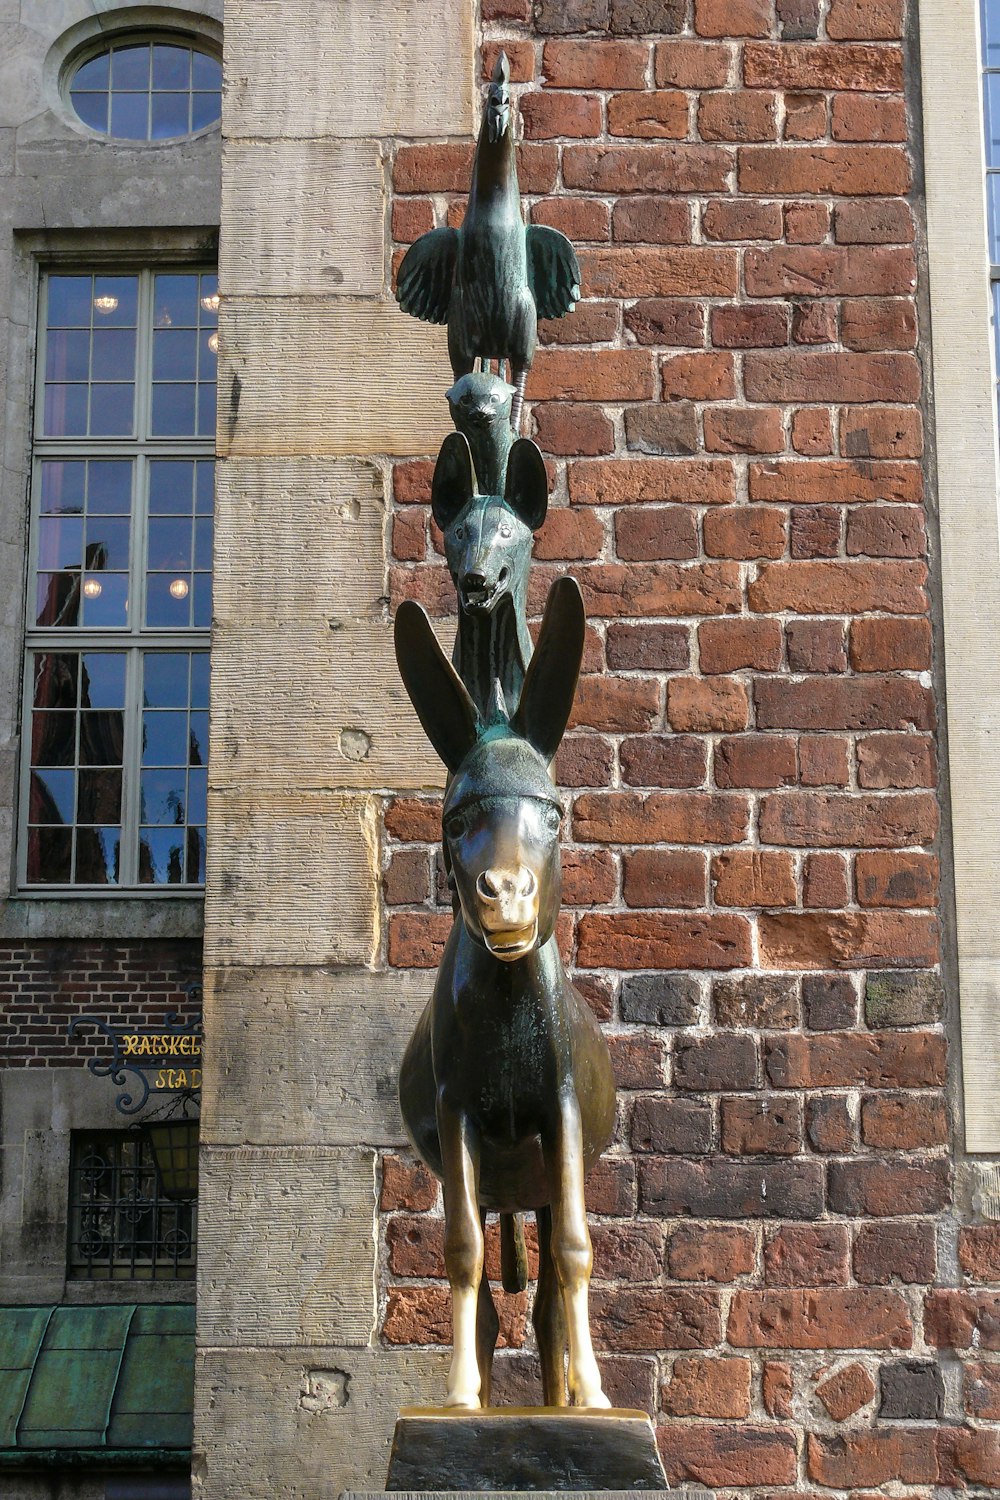 a statue of a dog and a bird on a brick wall